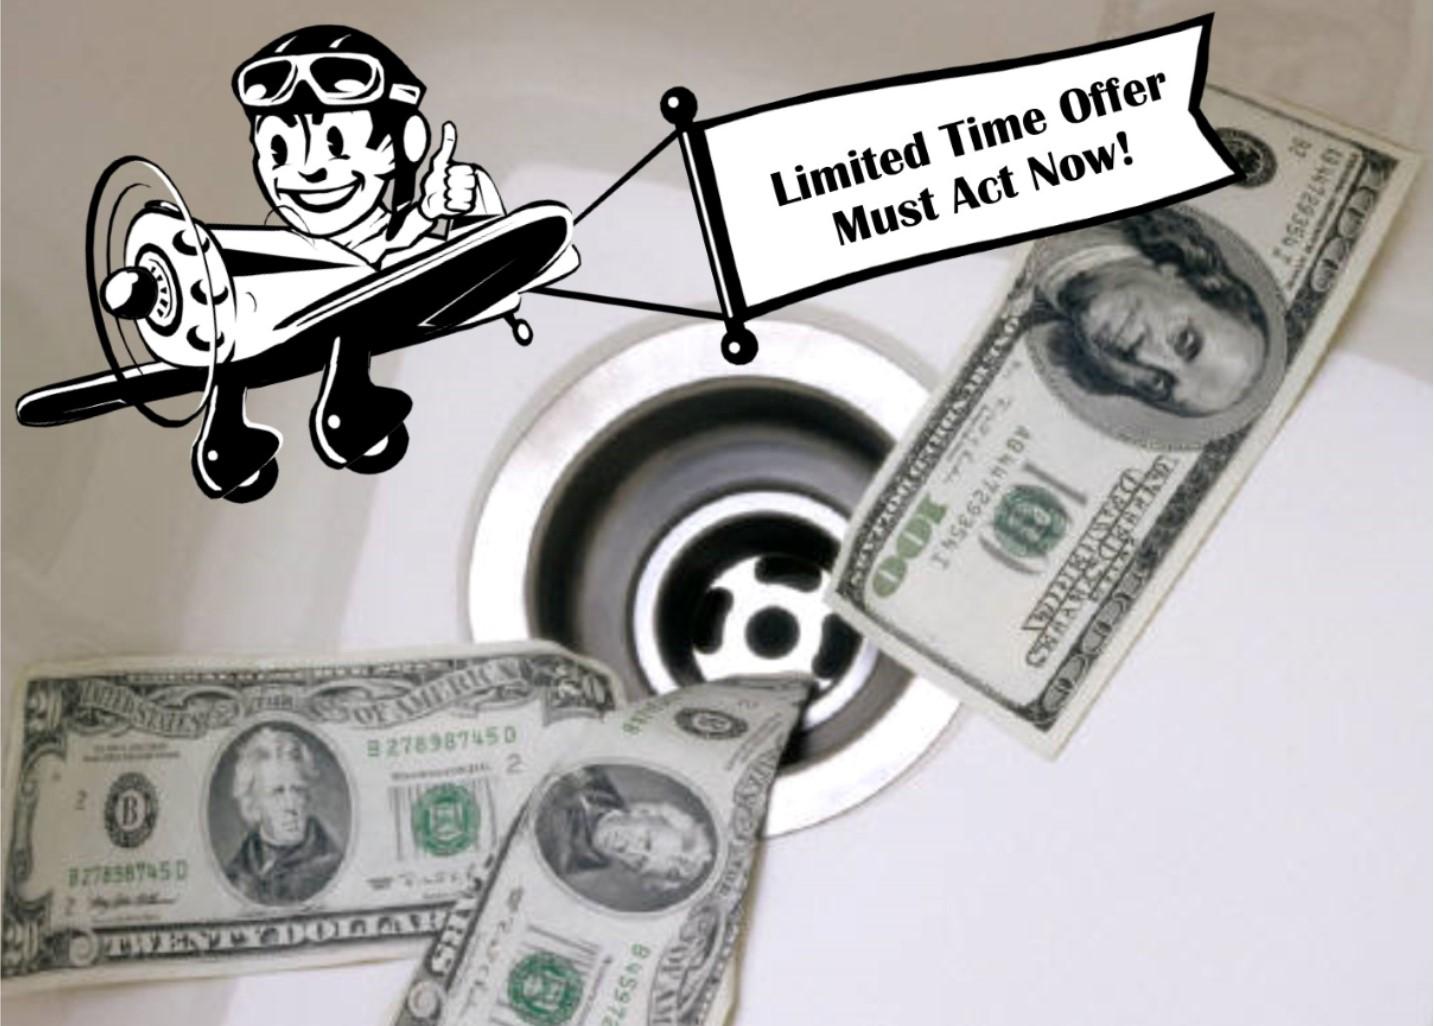 Money going down the drain.  Airplane flying over with sign "Limited Time Offer, Must Act Now!"